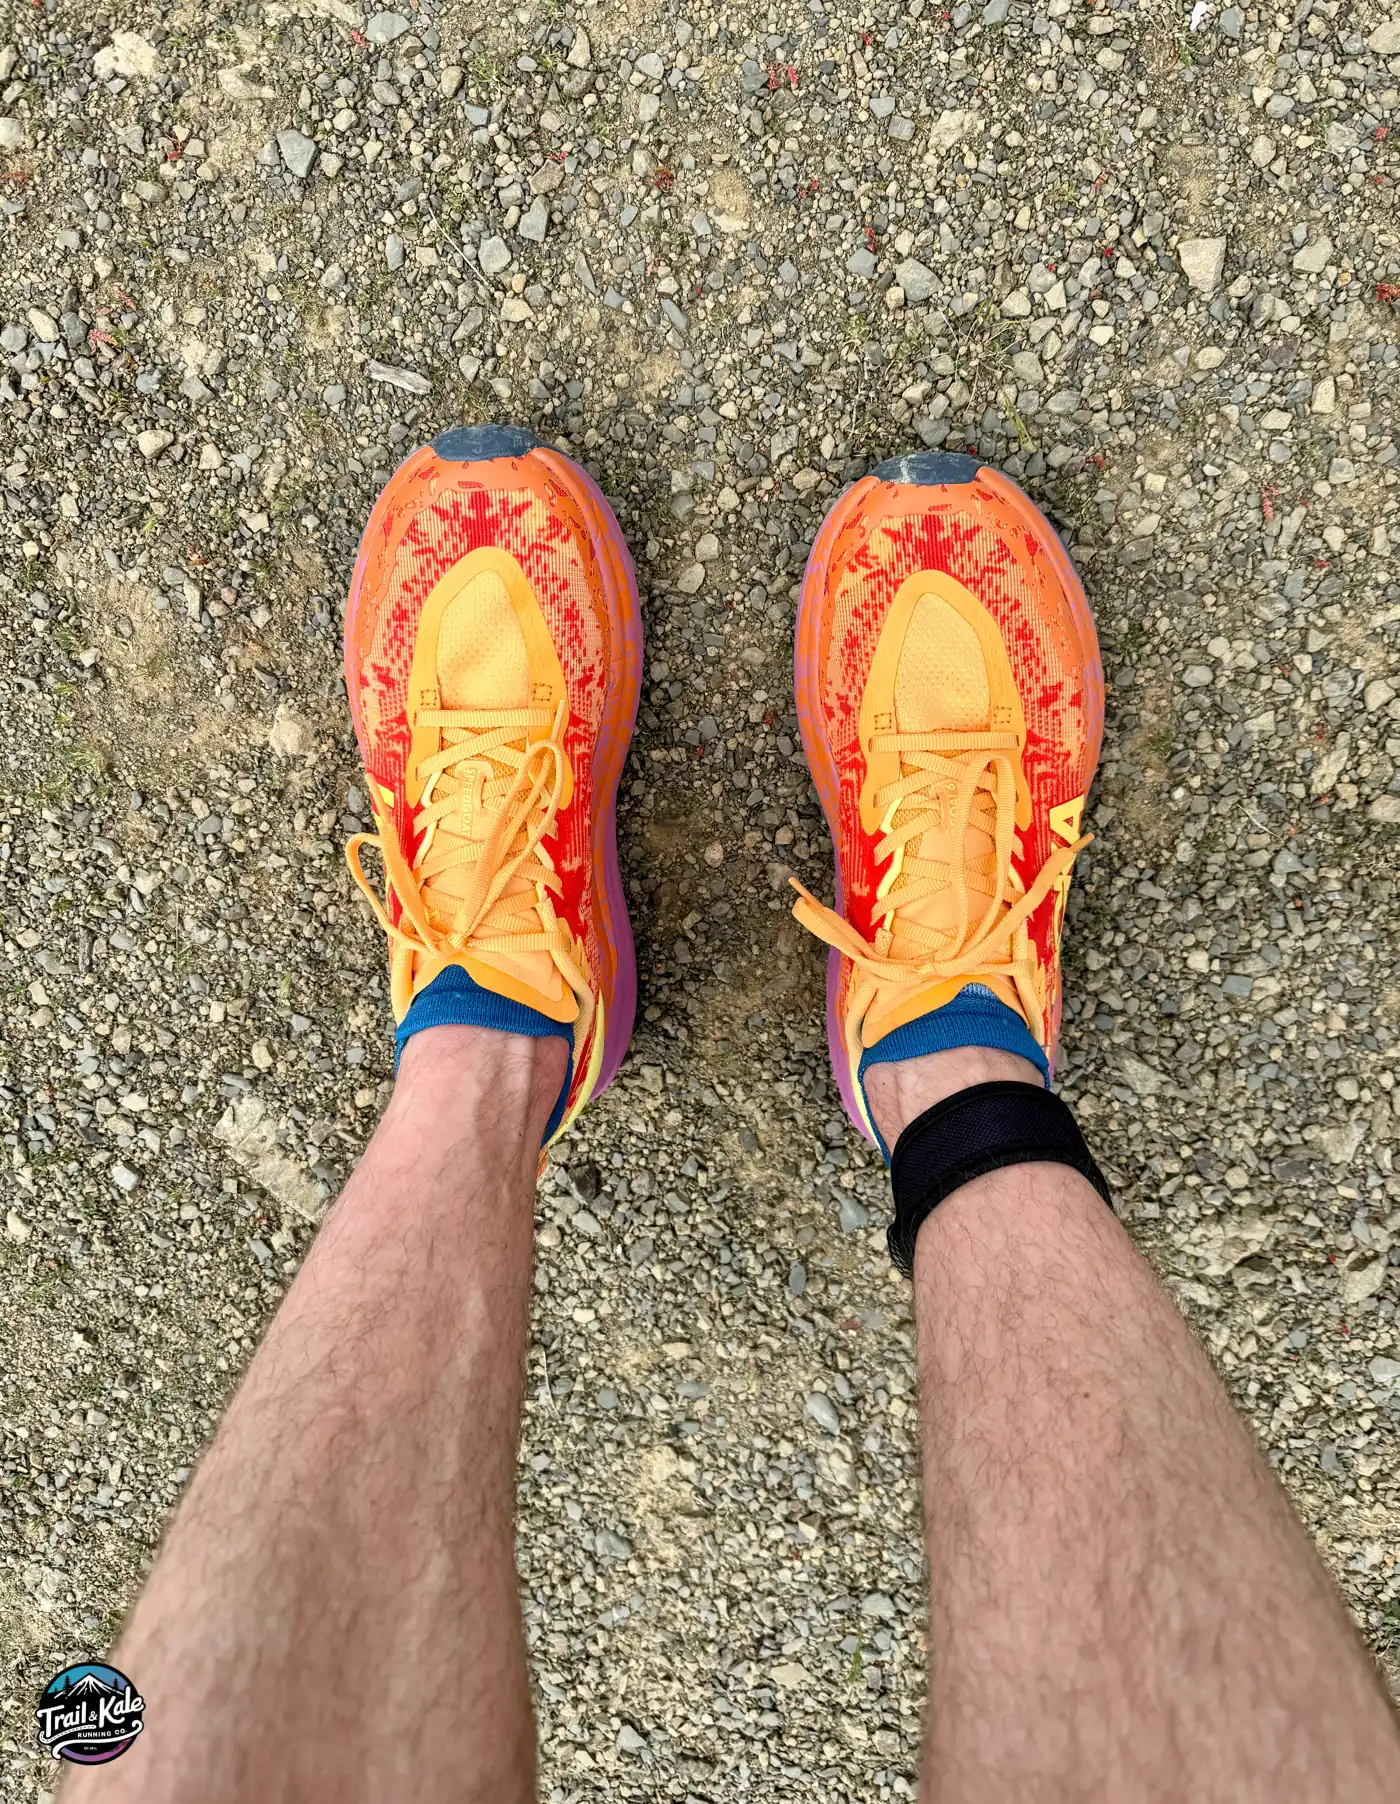 How the Hoka Speedgoat 6 looks on my feet, and if you're wondering what the ankle band is, it's my Para'kito mosquito repeller